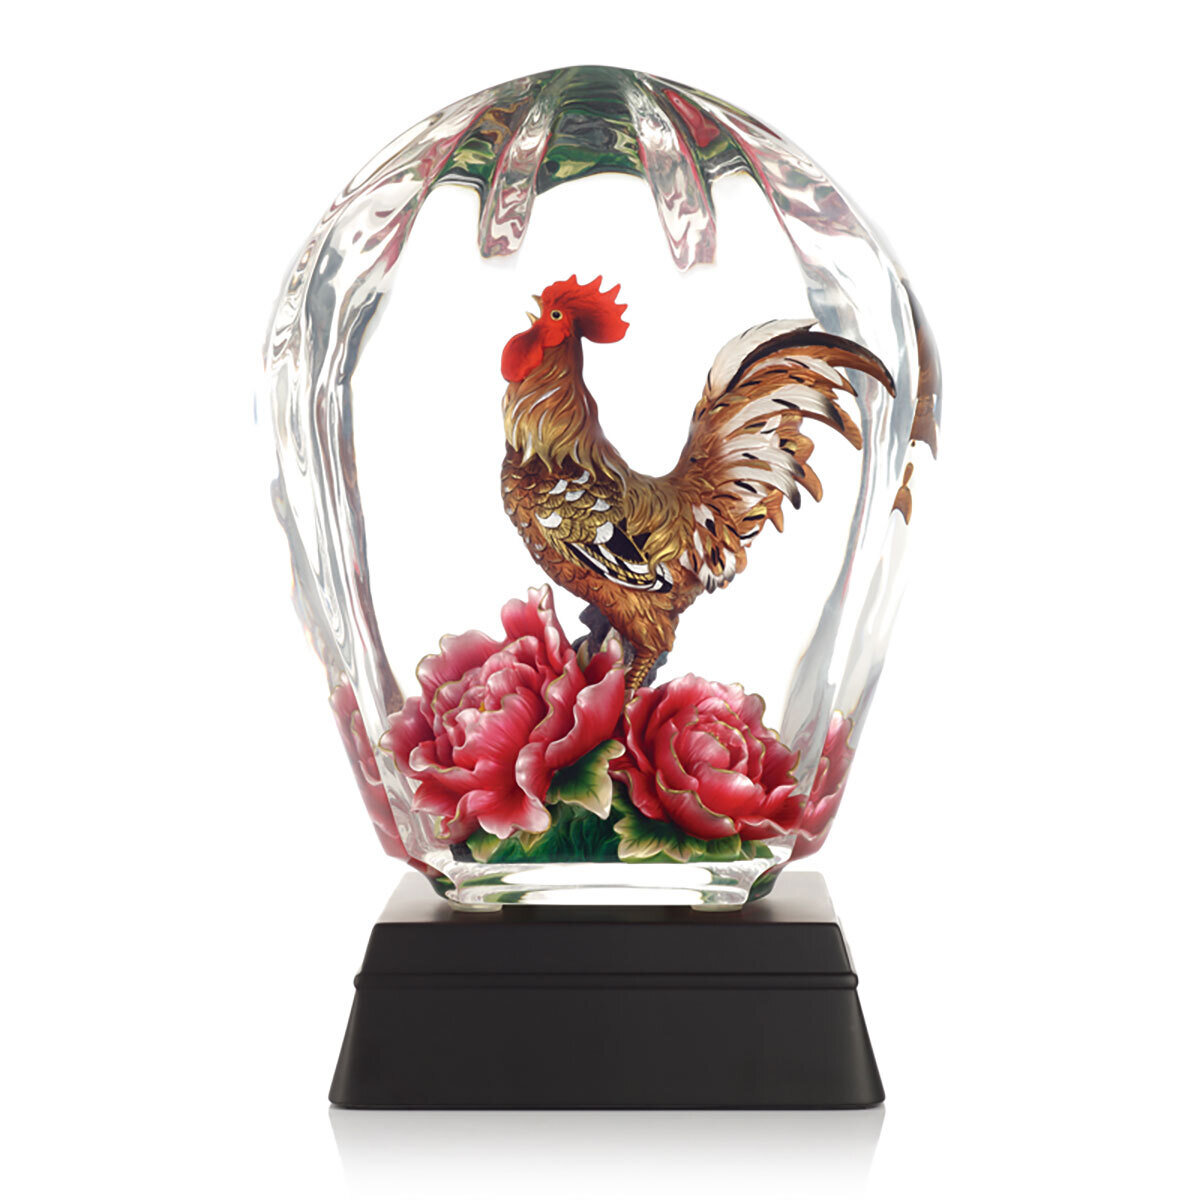 Franz Porcelain Glad Tidings From Rooster Design Lucite Figurine With Wooden Base FL00132